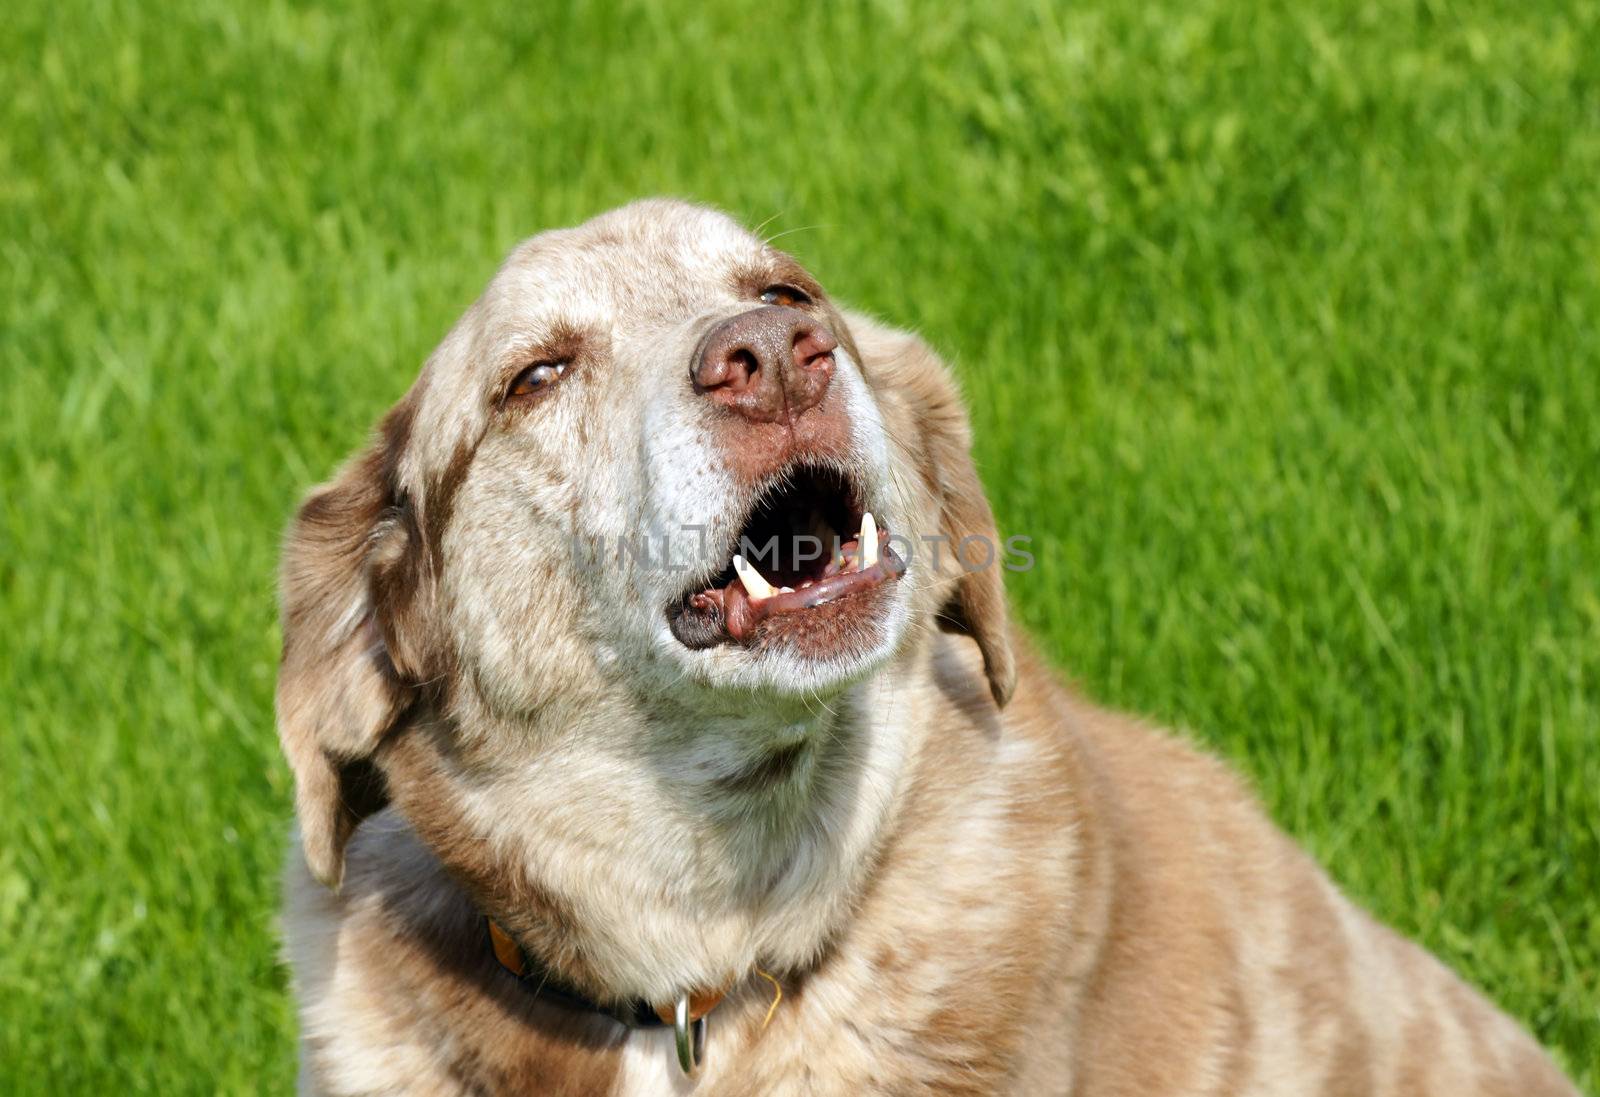 Large mixed breed dog barking, with bottom teeth showing, over grass background.